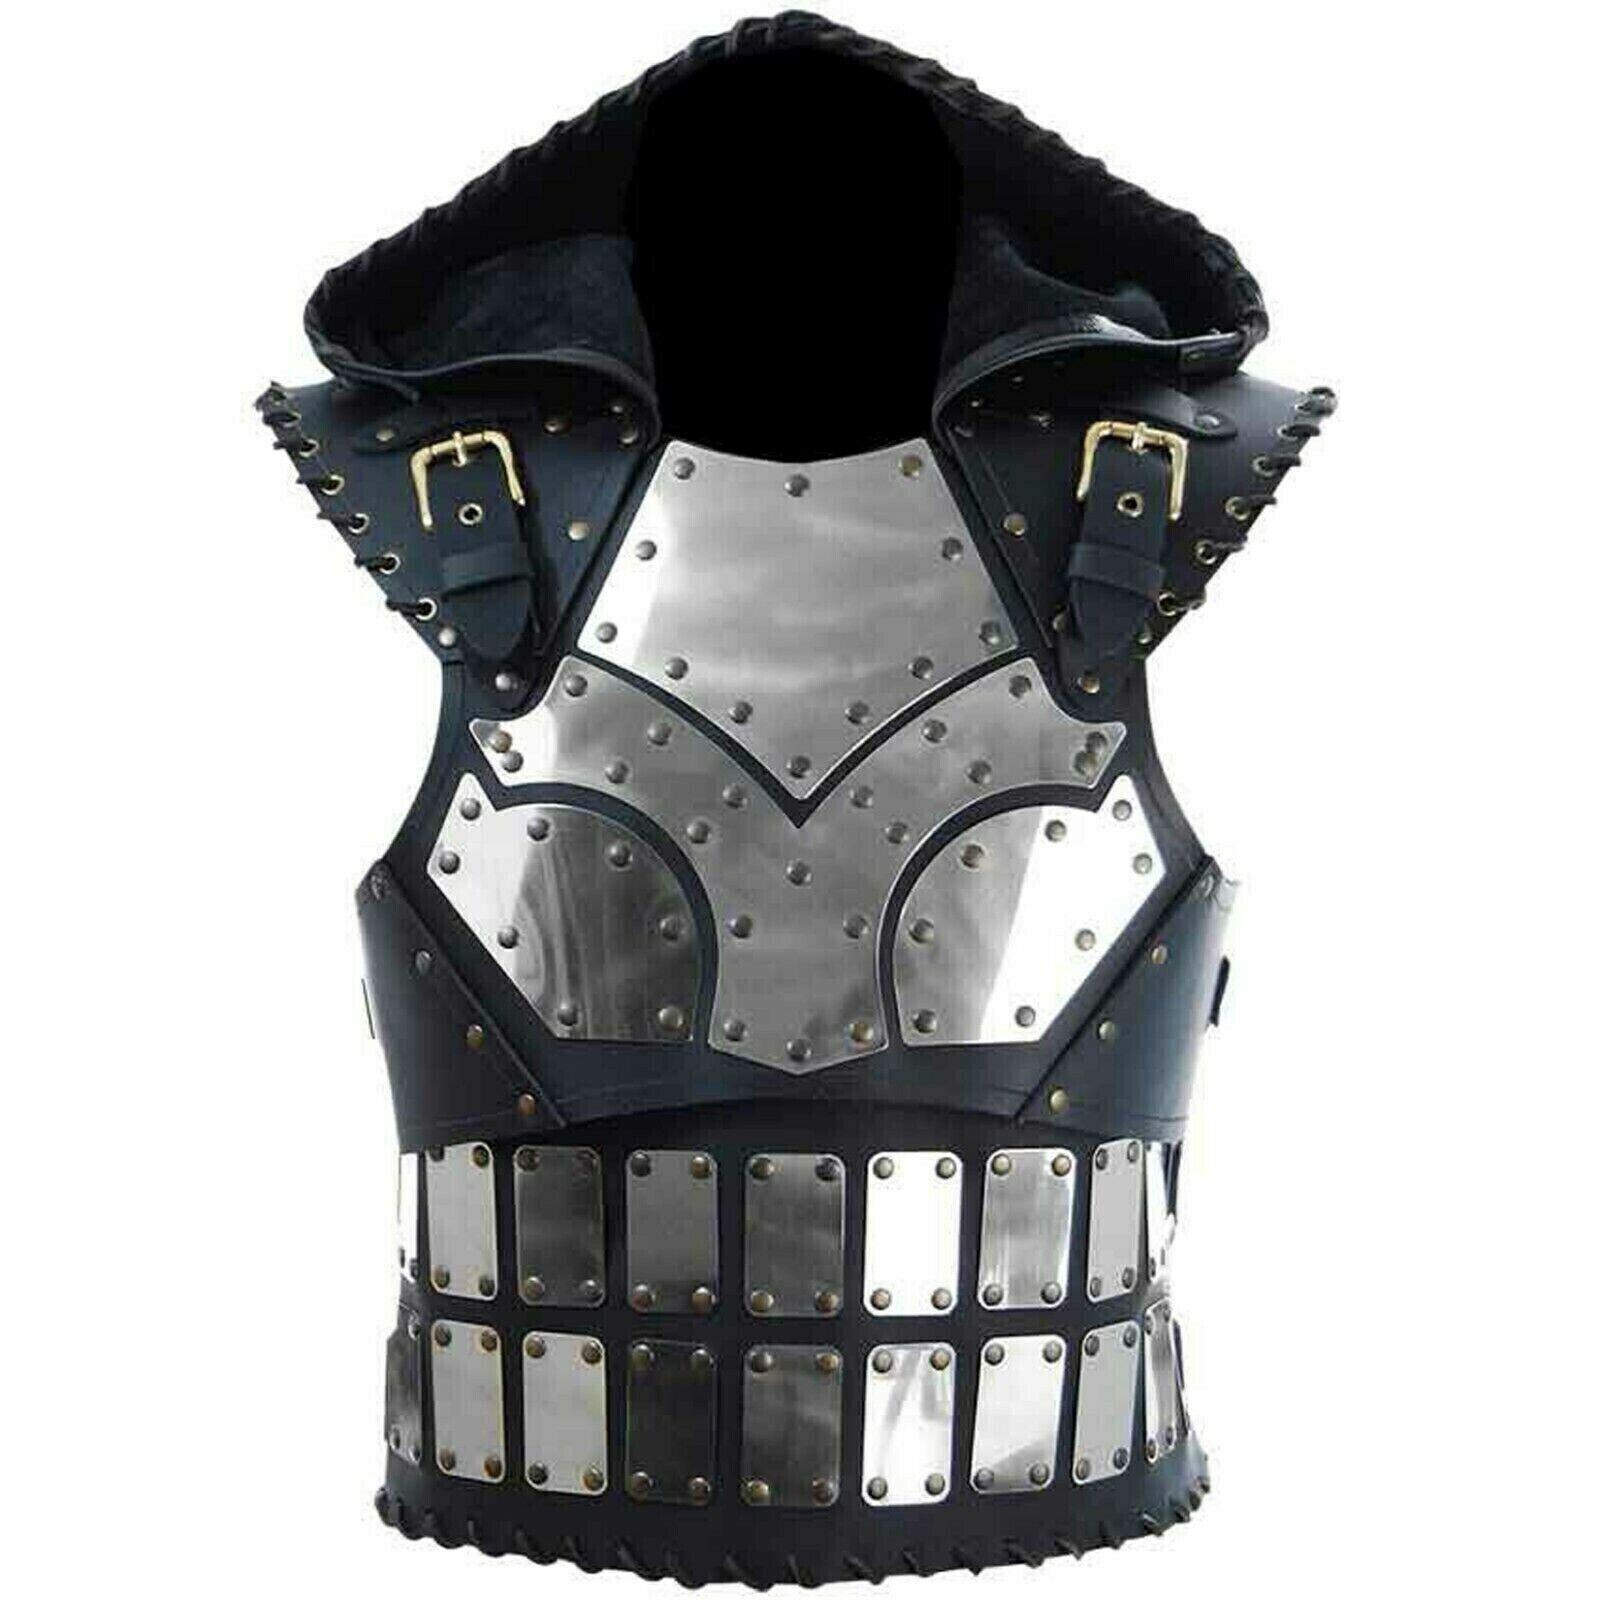 Medieval Leather Articulated Scoundrel Leather Armor Costume leather